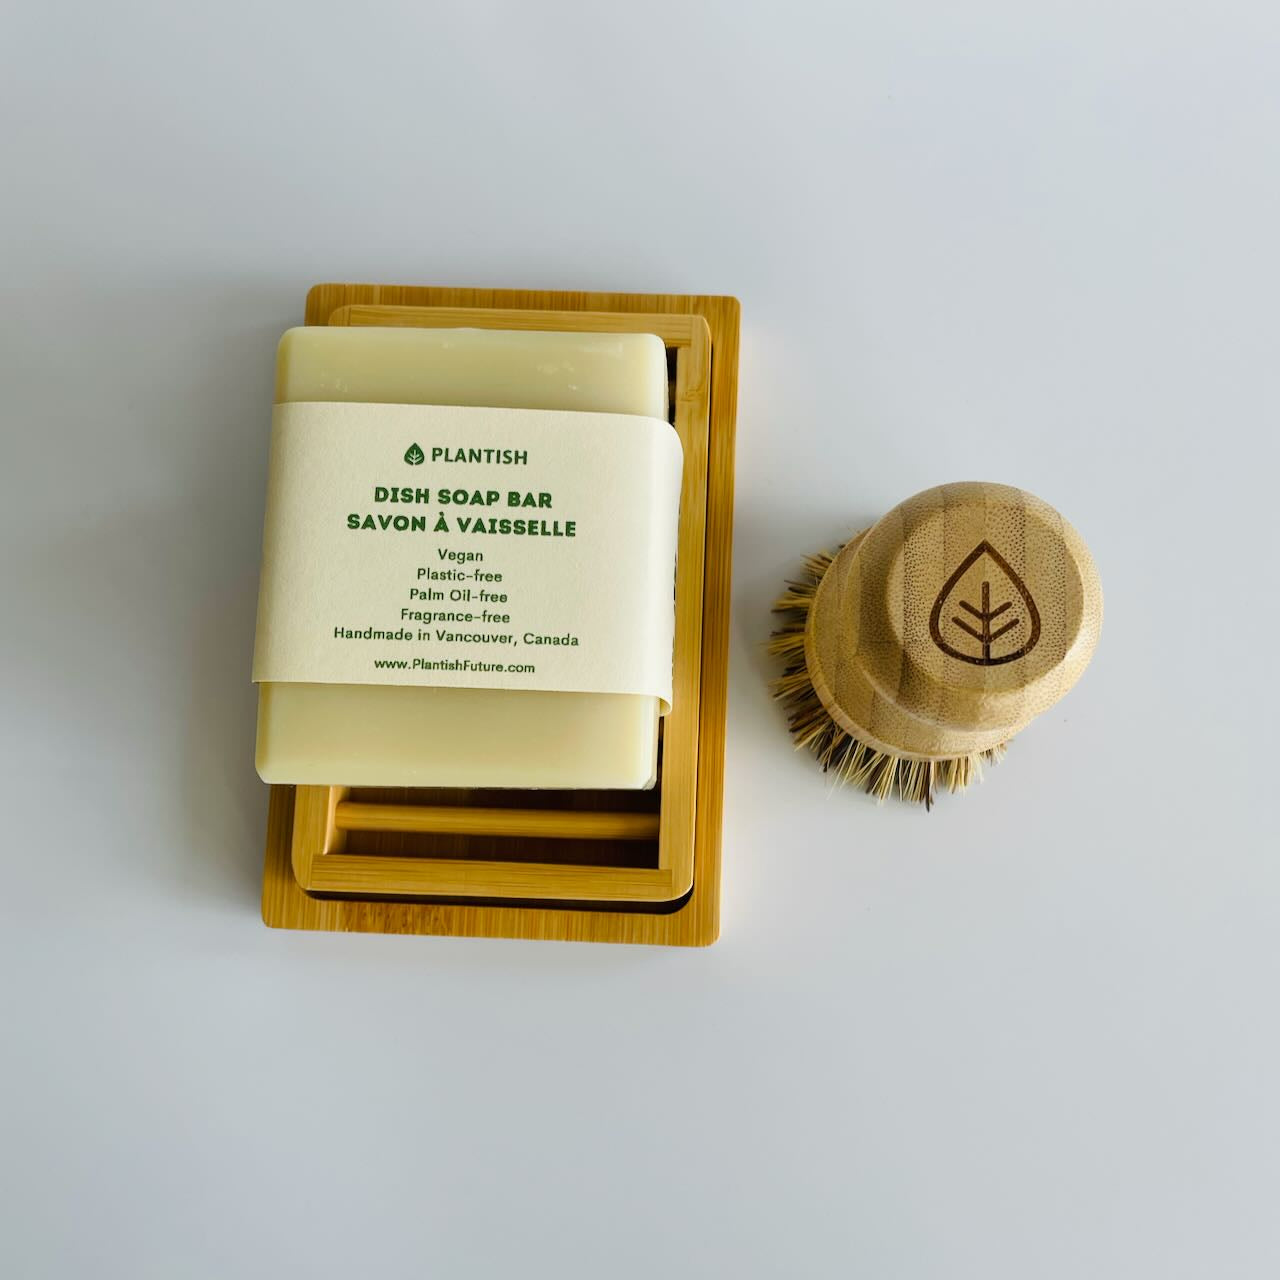 A solid dish soap in its original packaging on a bamboo soap dish, with a sisal bamboo scrubber facing down next to it